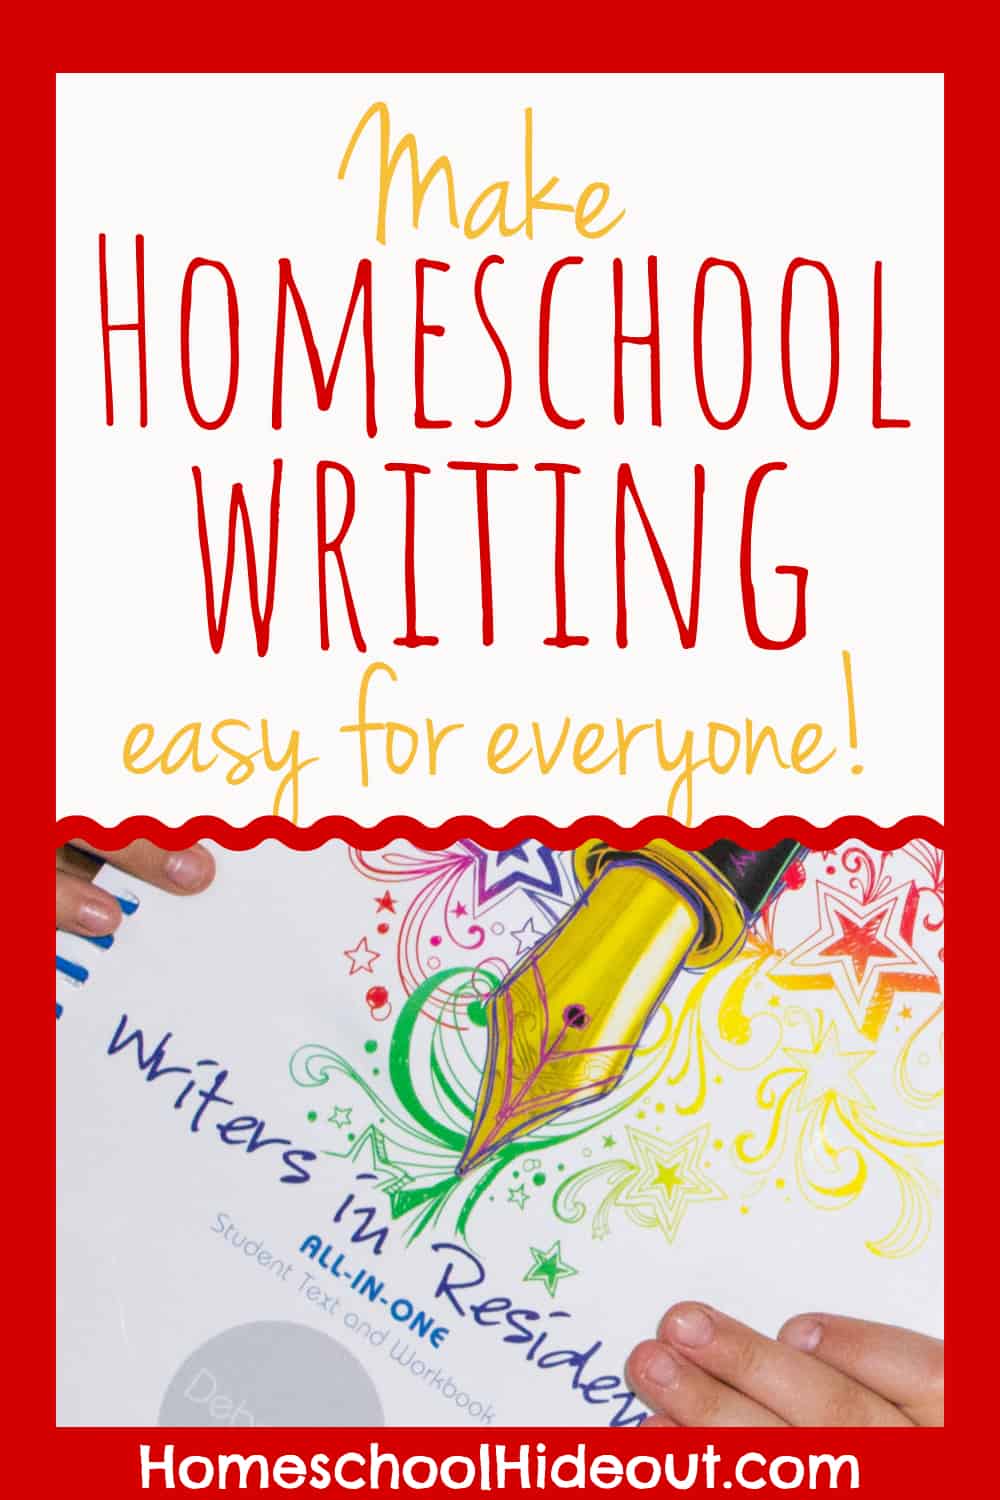 Take the struggle out of homeschool writing with Writers in Residence!